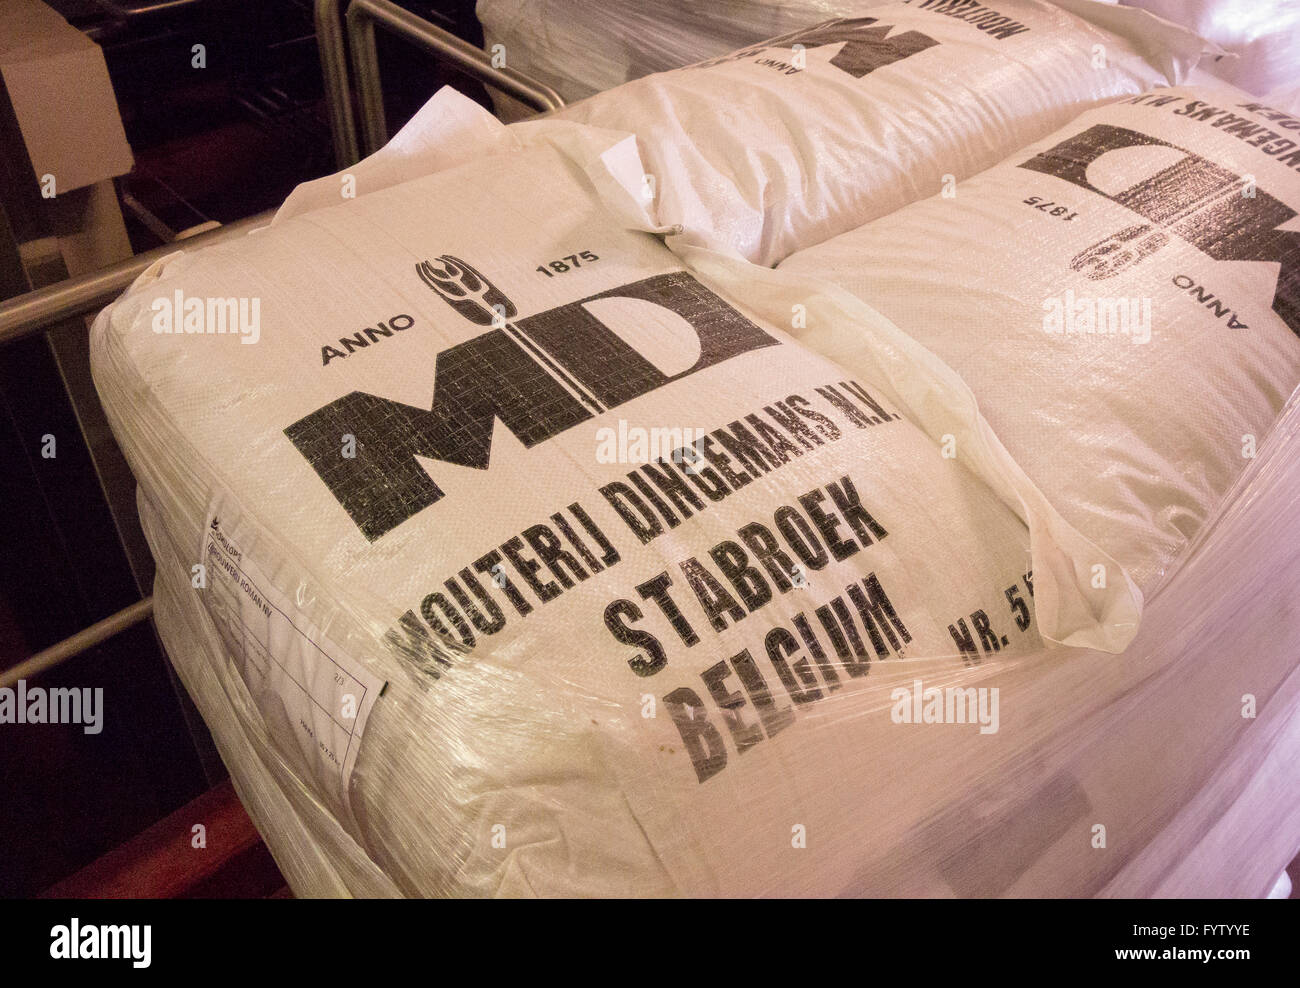 BELGIUM - Bags of Belgian malt, made by Mouterij Dingemans malster, for brewing beer. Malted barley. Stock Photo